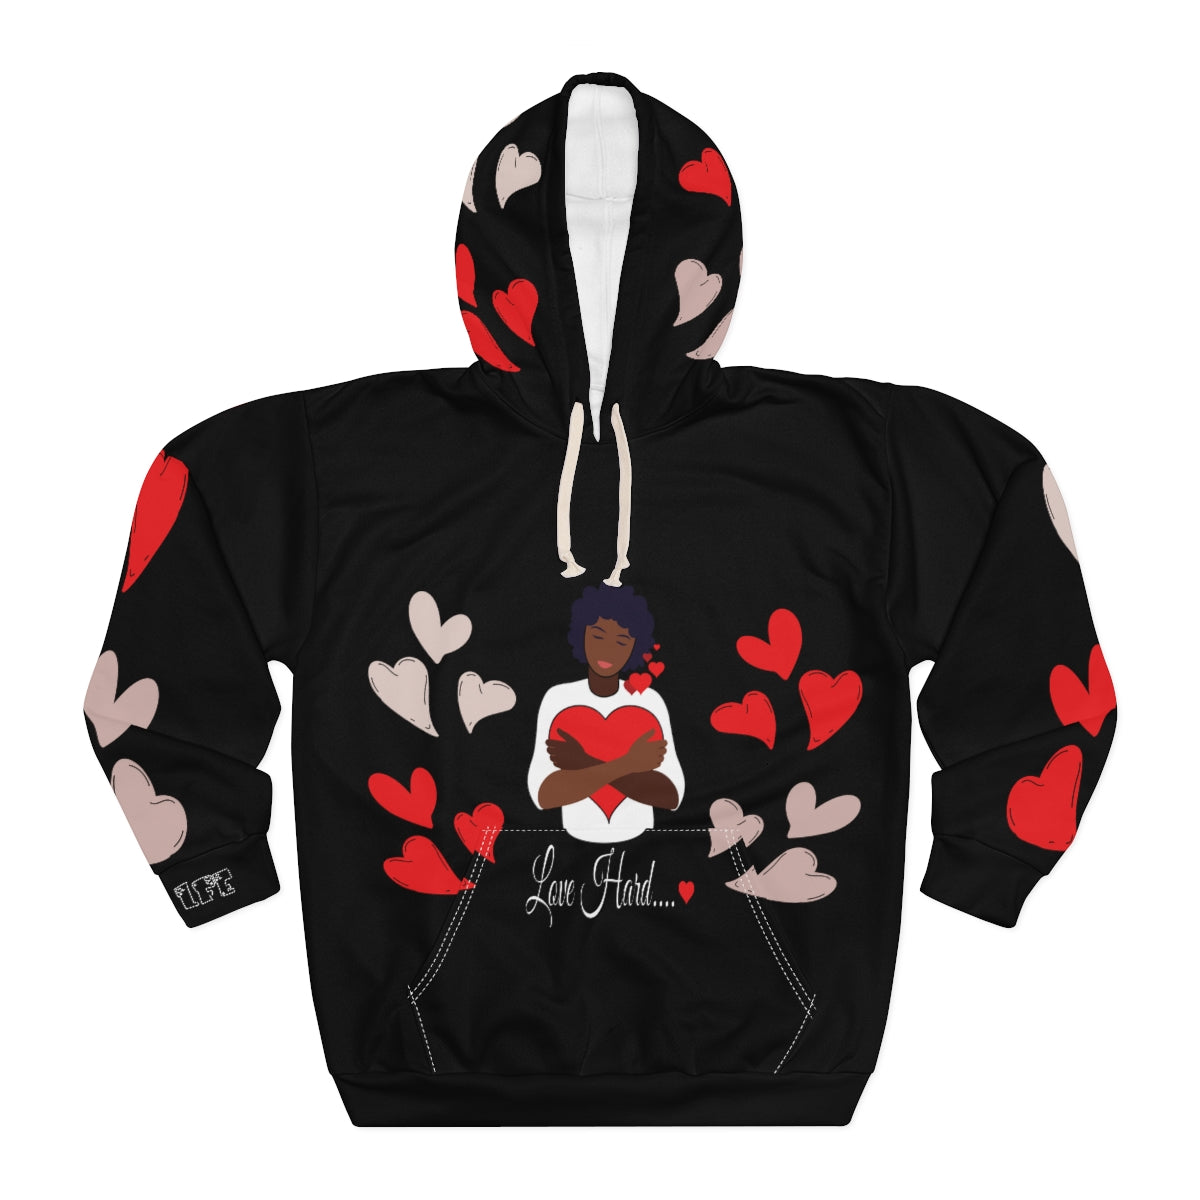 LOVE HARD BLK Unisex Pullover Hoodie - PDR L.F.E. 